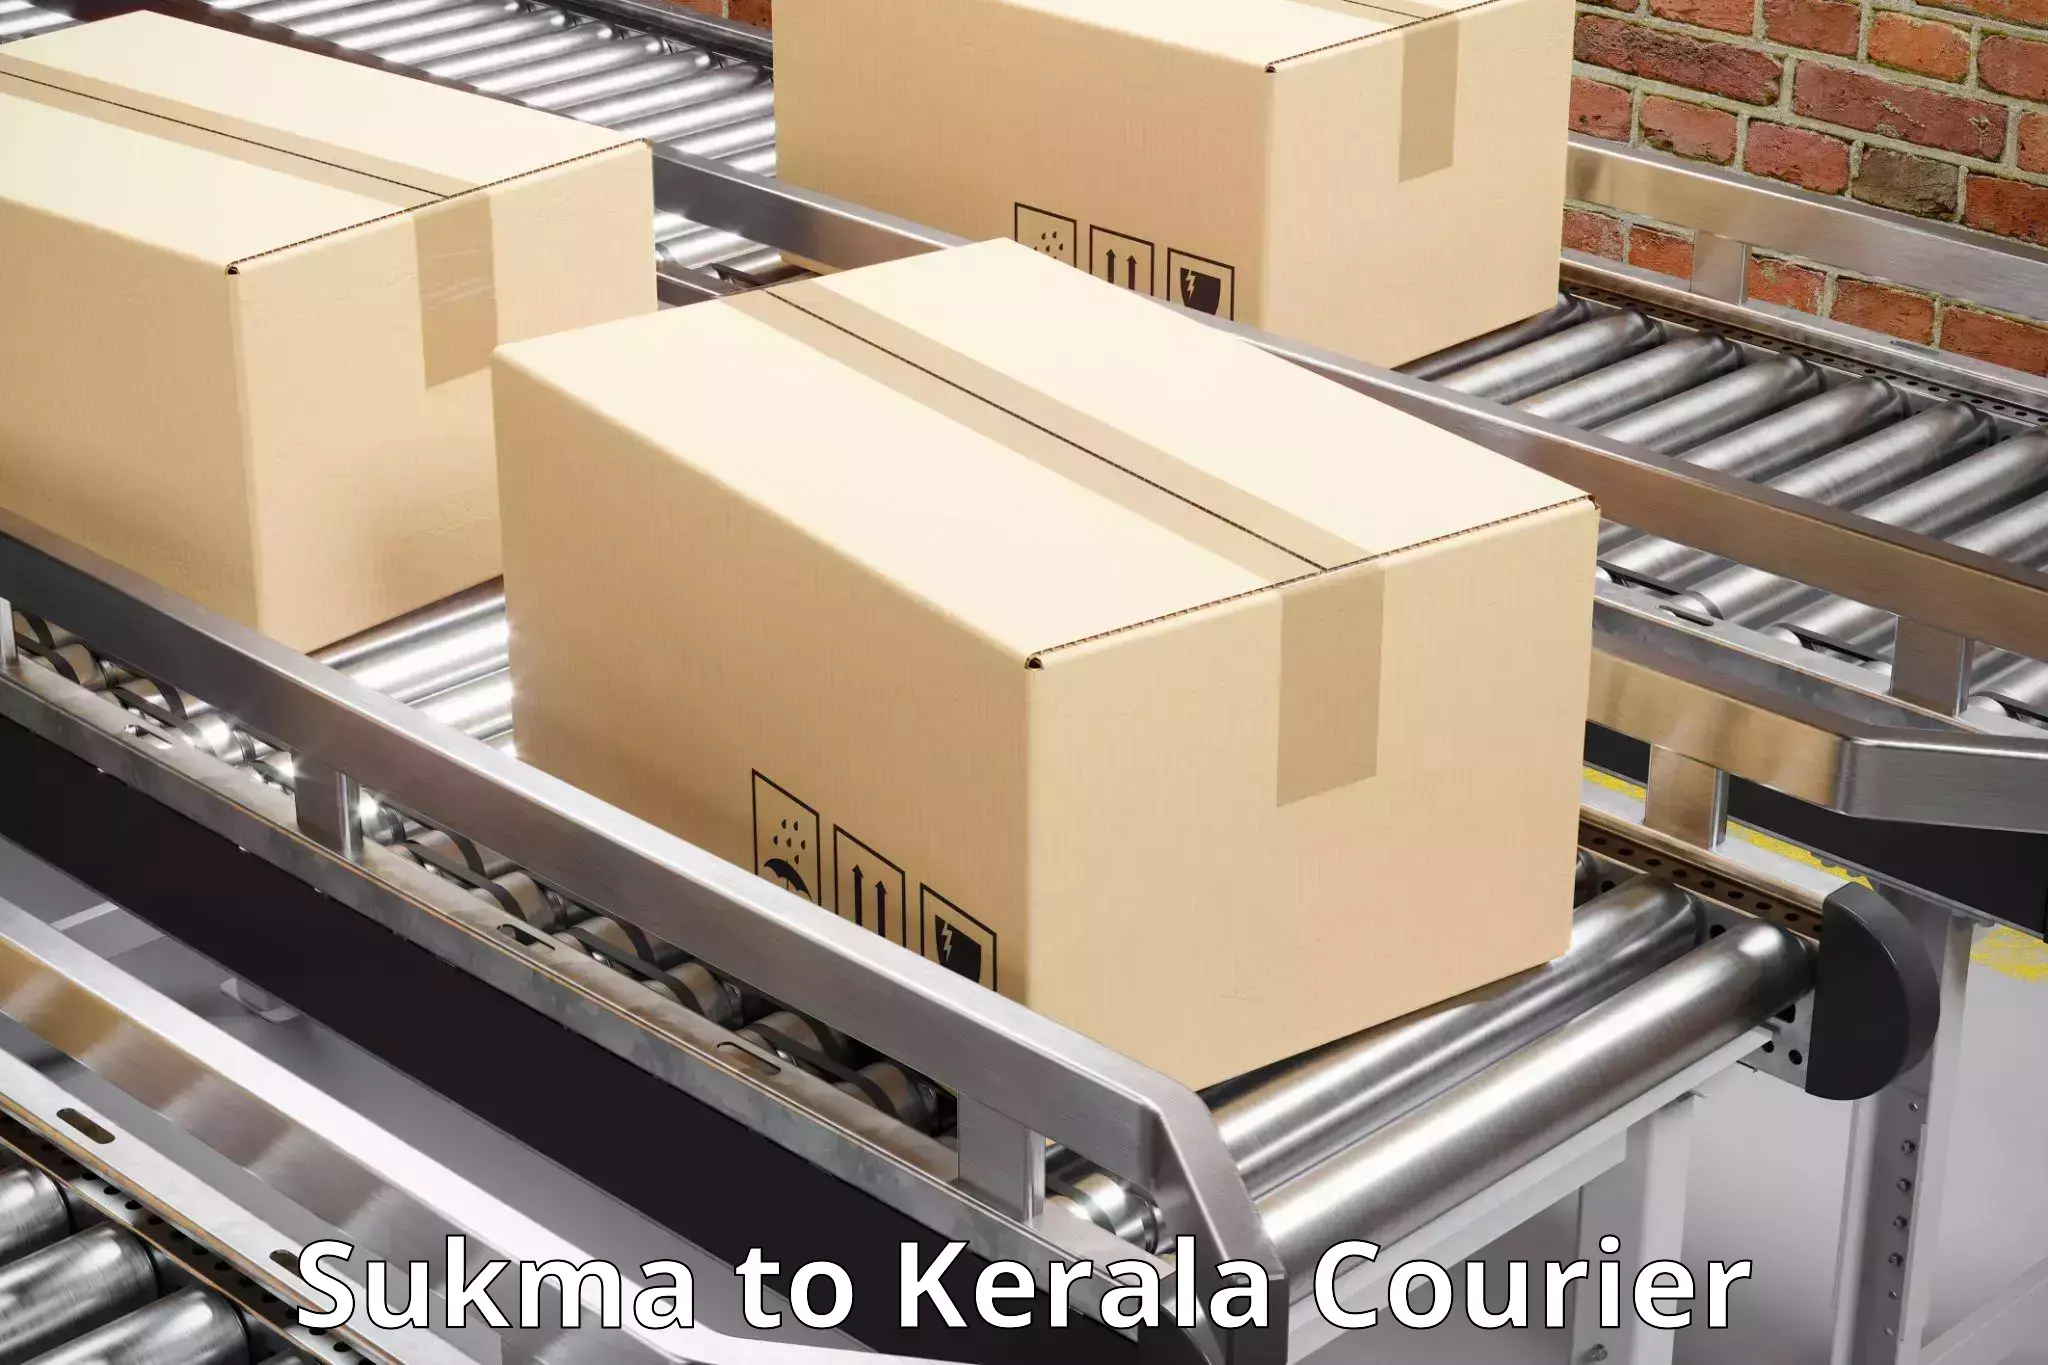 Round-the-clock parcel delivery Sukma to Calicut